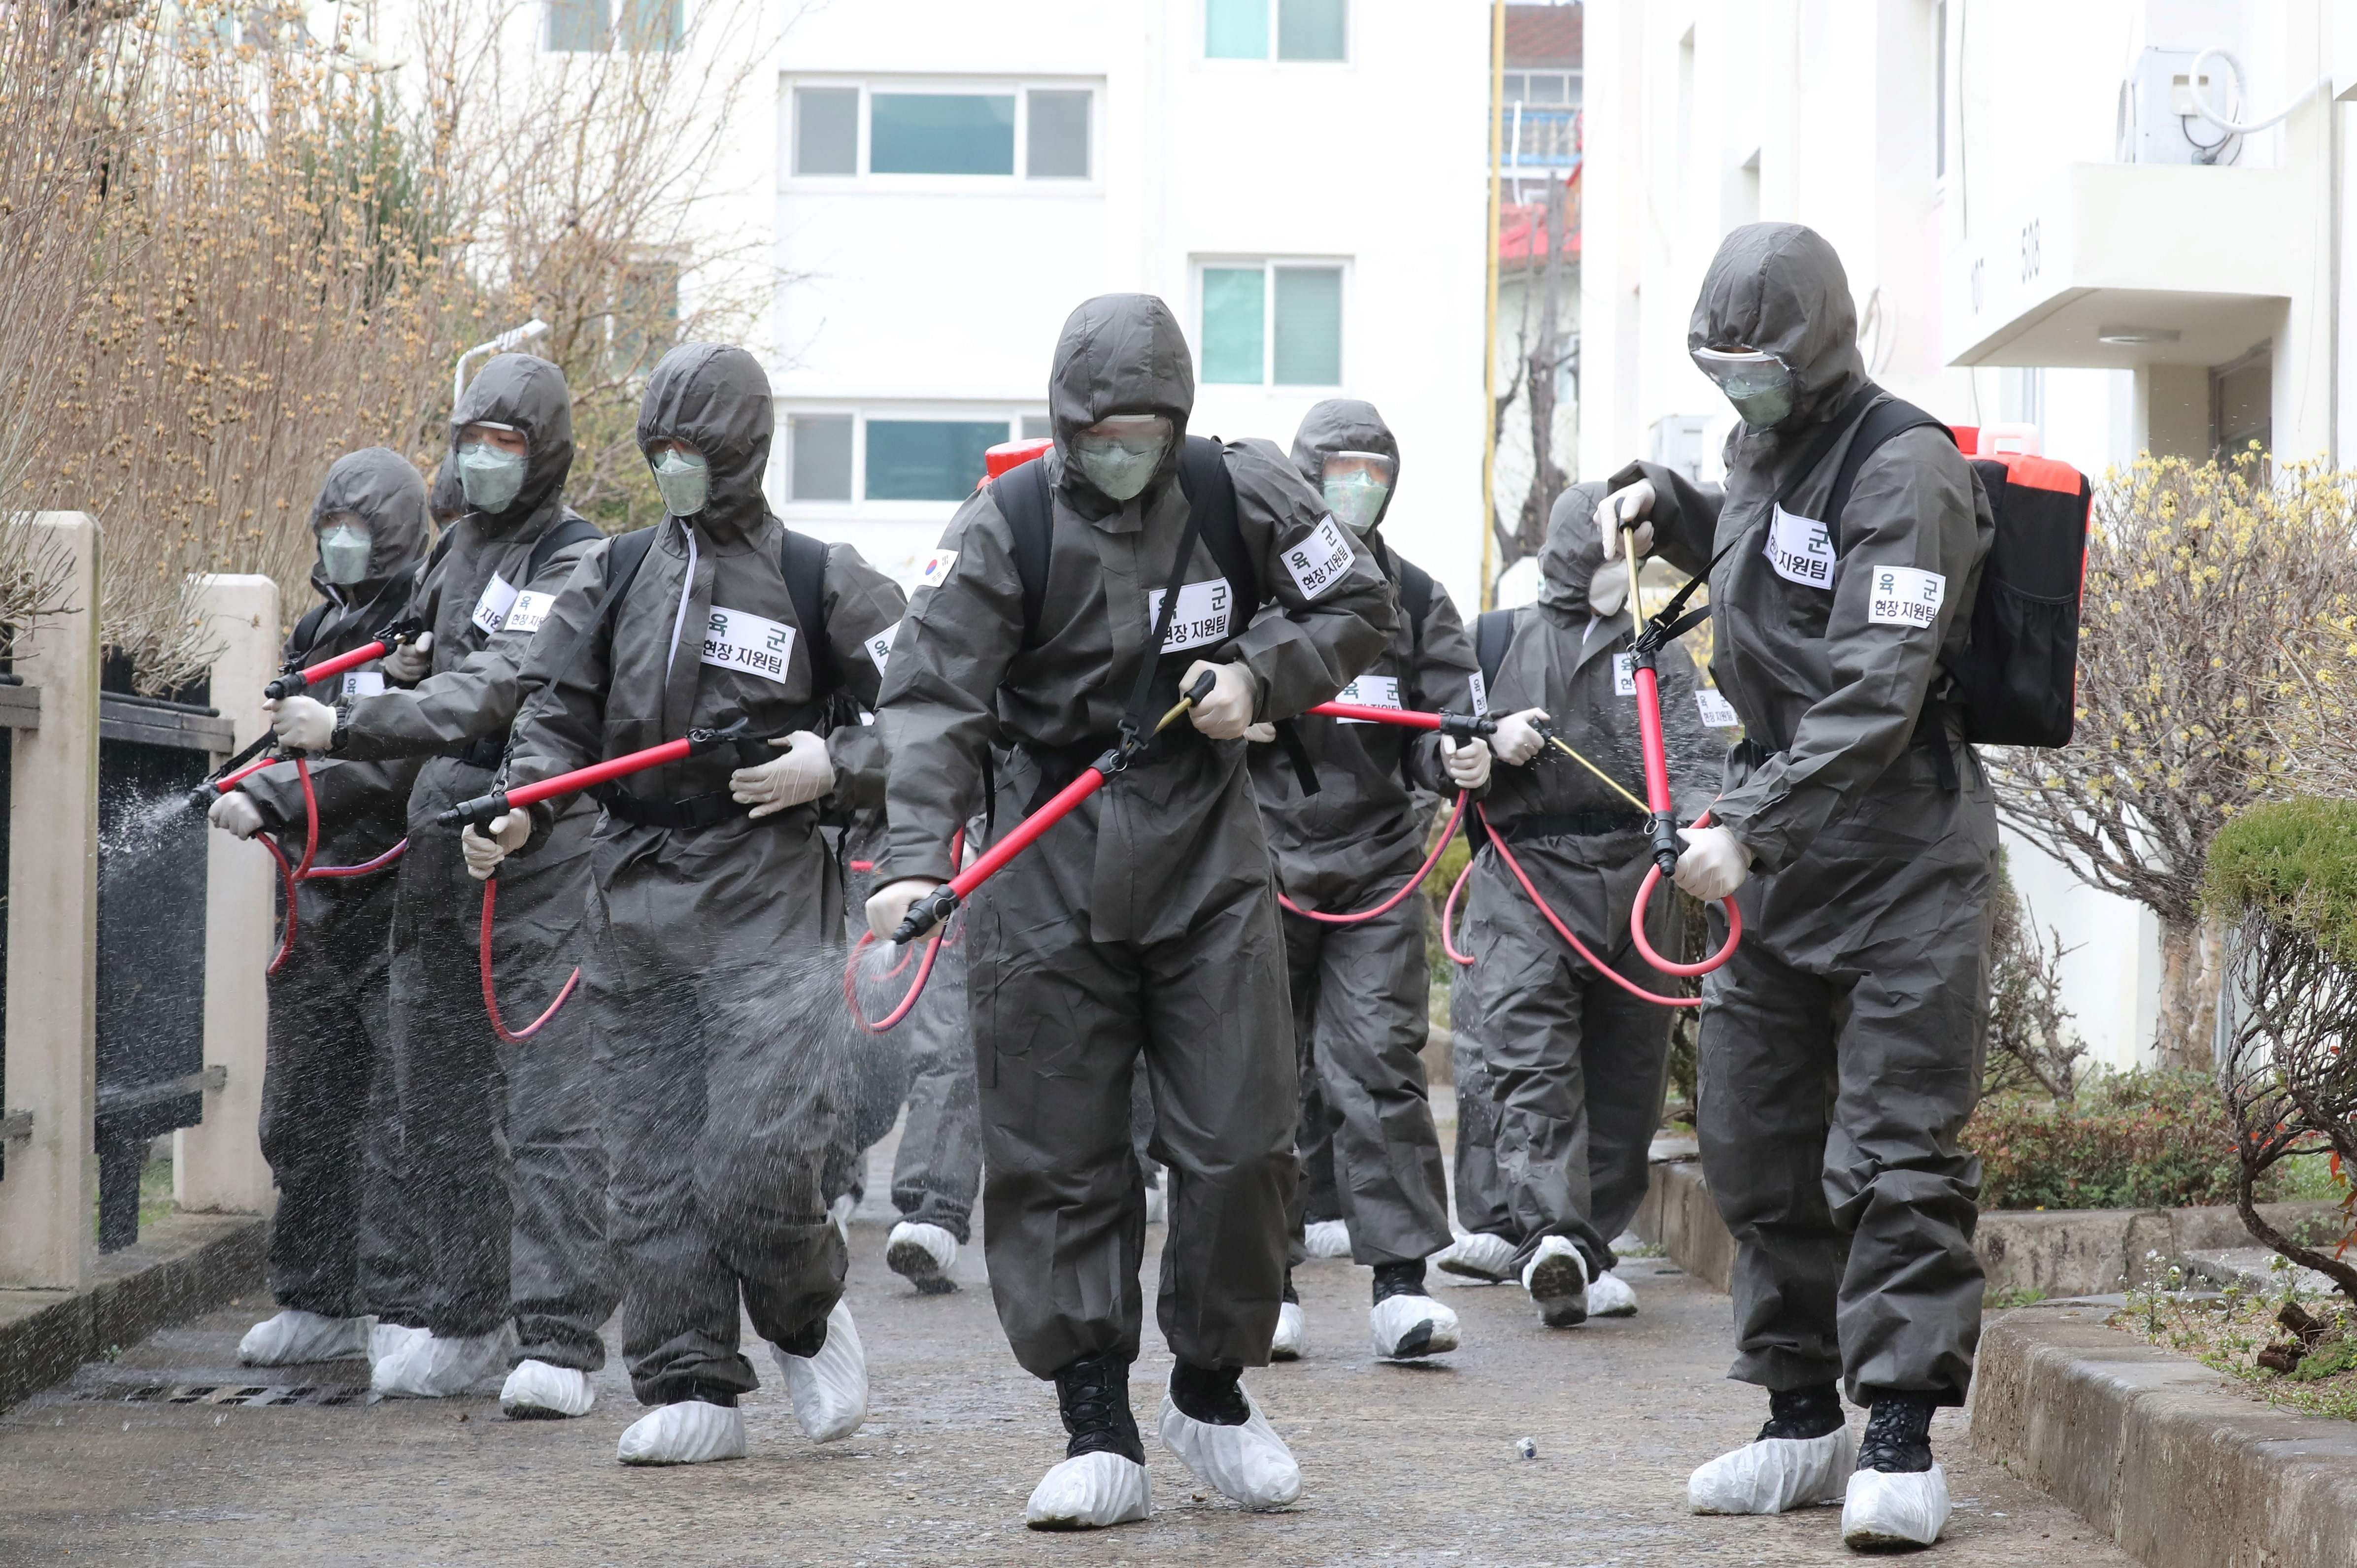 South Korean soldiers wearing protective gear spray disinfectant at a closed apartment complex after 46 residents were confirmed to have the COVID-19 coronavirus. (Credit: AFP Photo)